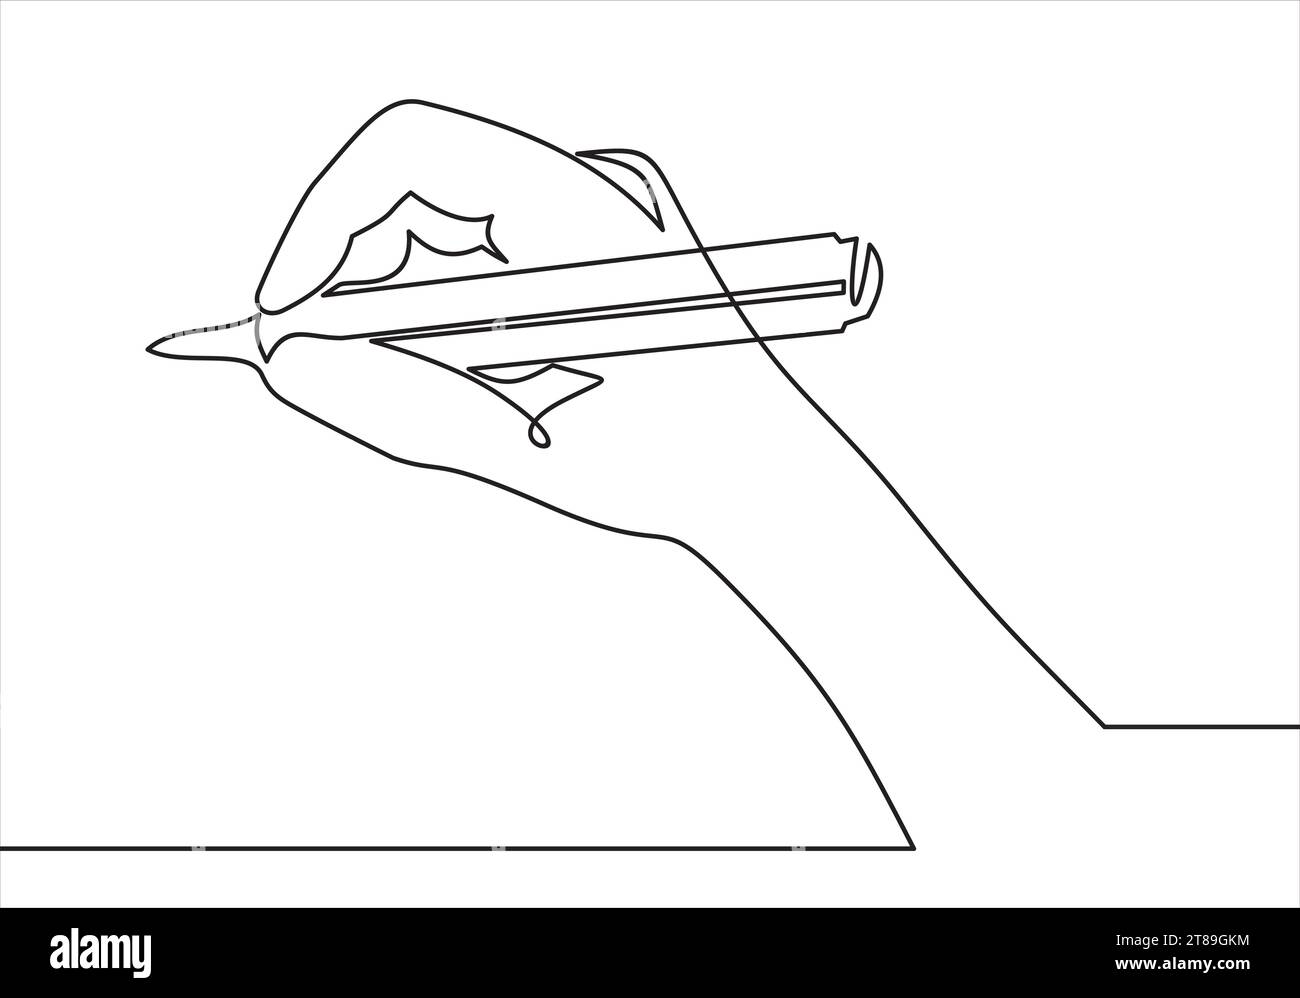 line drawing of hand holding a pen- continuous line drawing Stock Vector